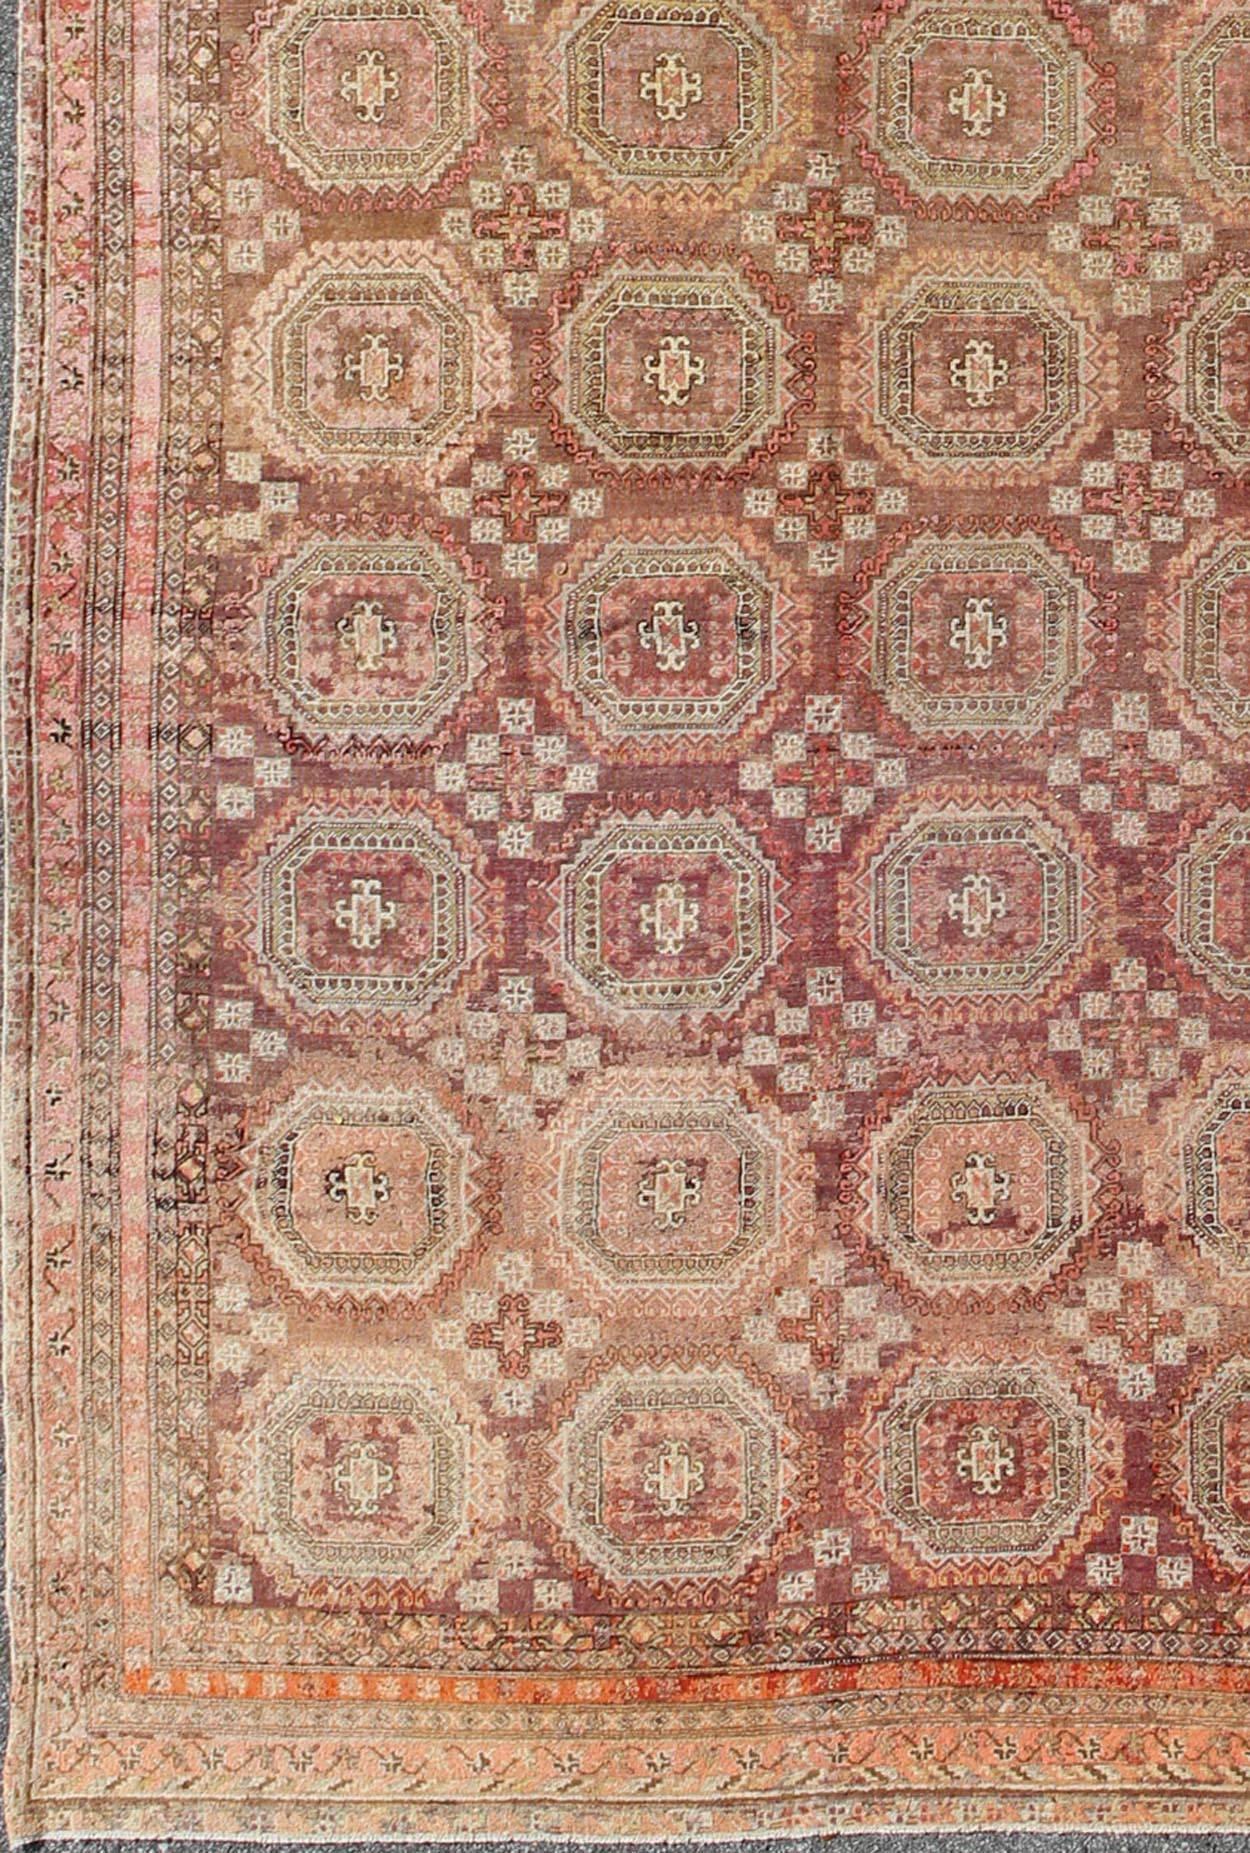 Antique Khotan rug with repeating medallion design in maroon / red, mpc-538, country of origin / type: Russia / tribal, circa 1900/early 20th century

This piece is a rare antique carpet from Turkestan with delightful colors and all-over repeating